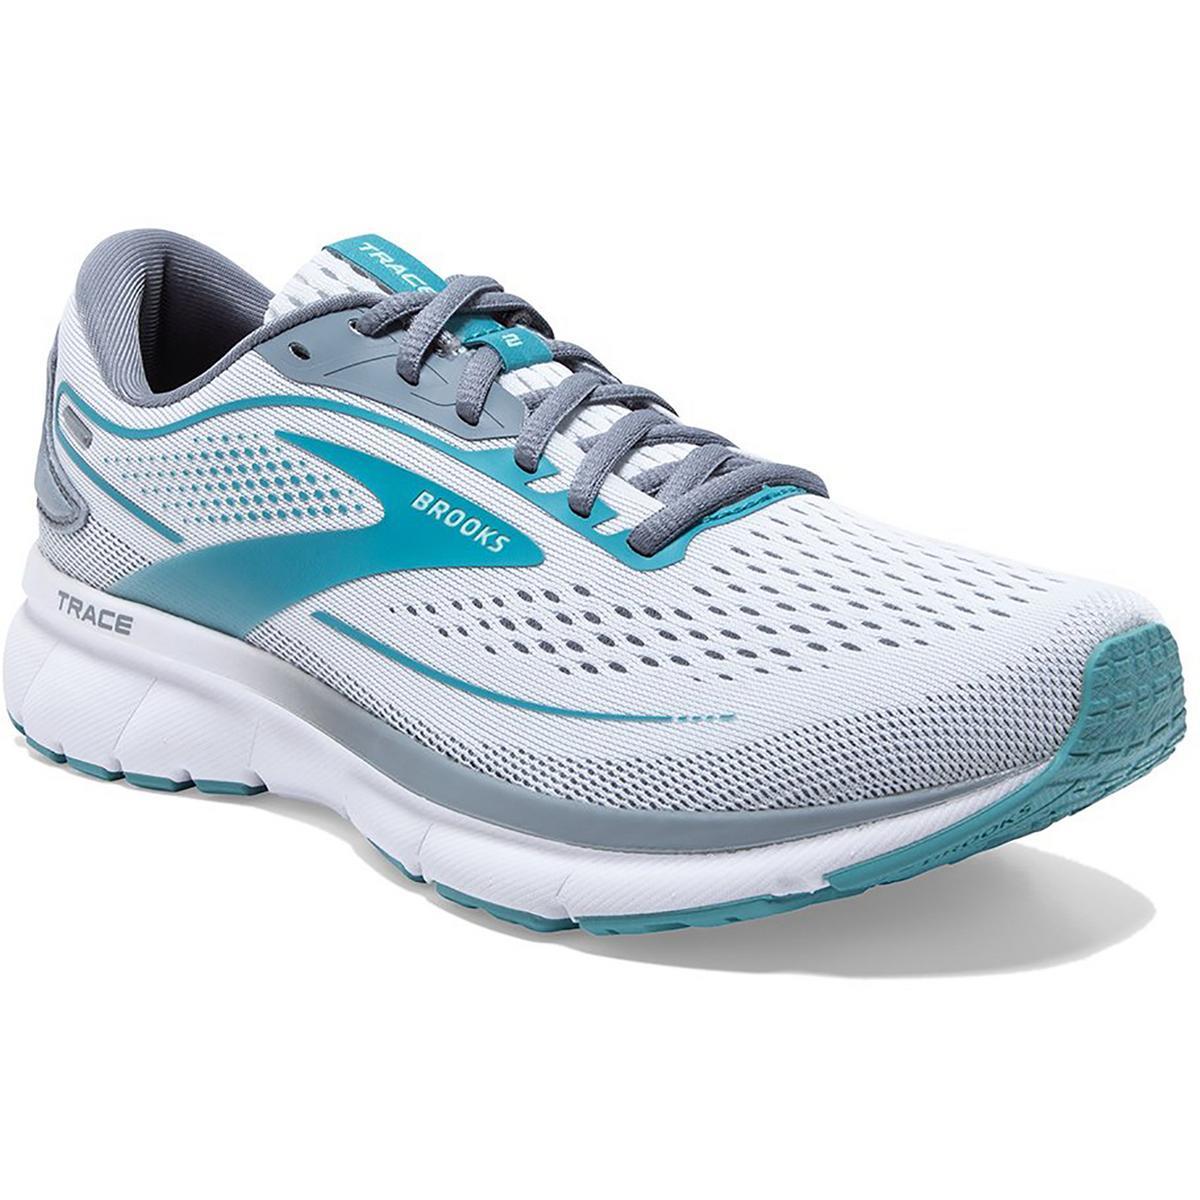 Brooks Womens Trace 2 Performance Fitness Running Shoes Sneakers Bhfo 3263 White/Grey/Porcelain